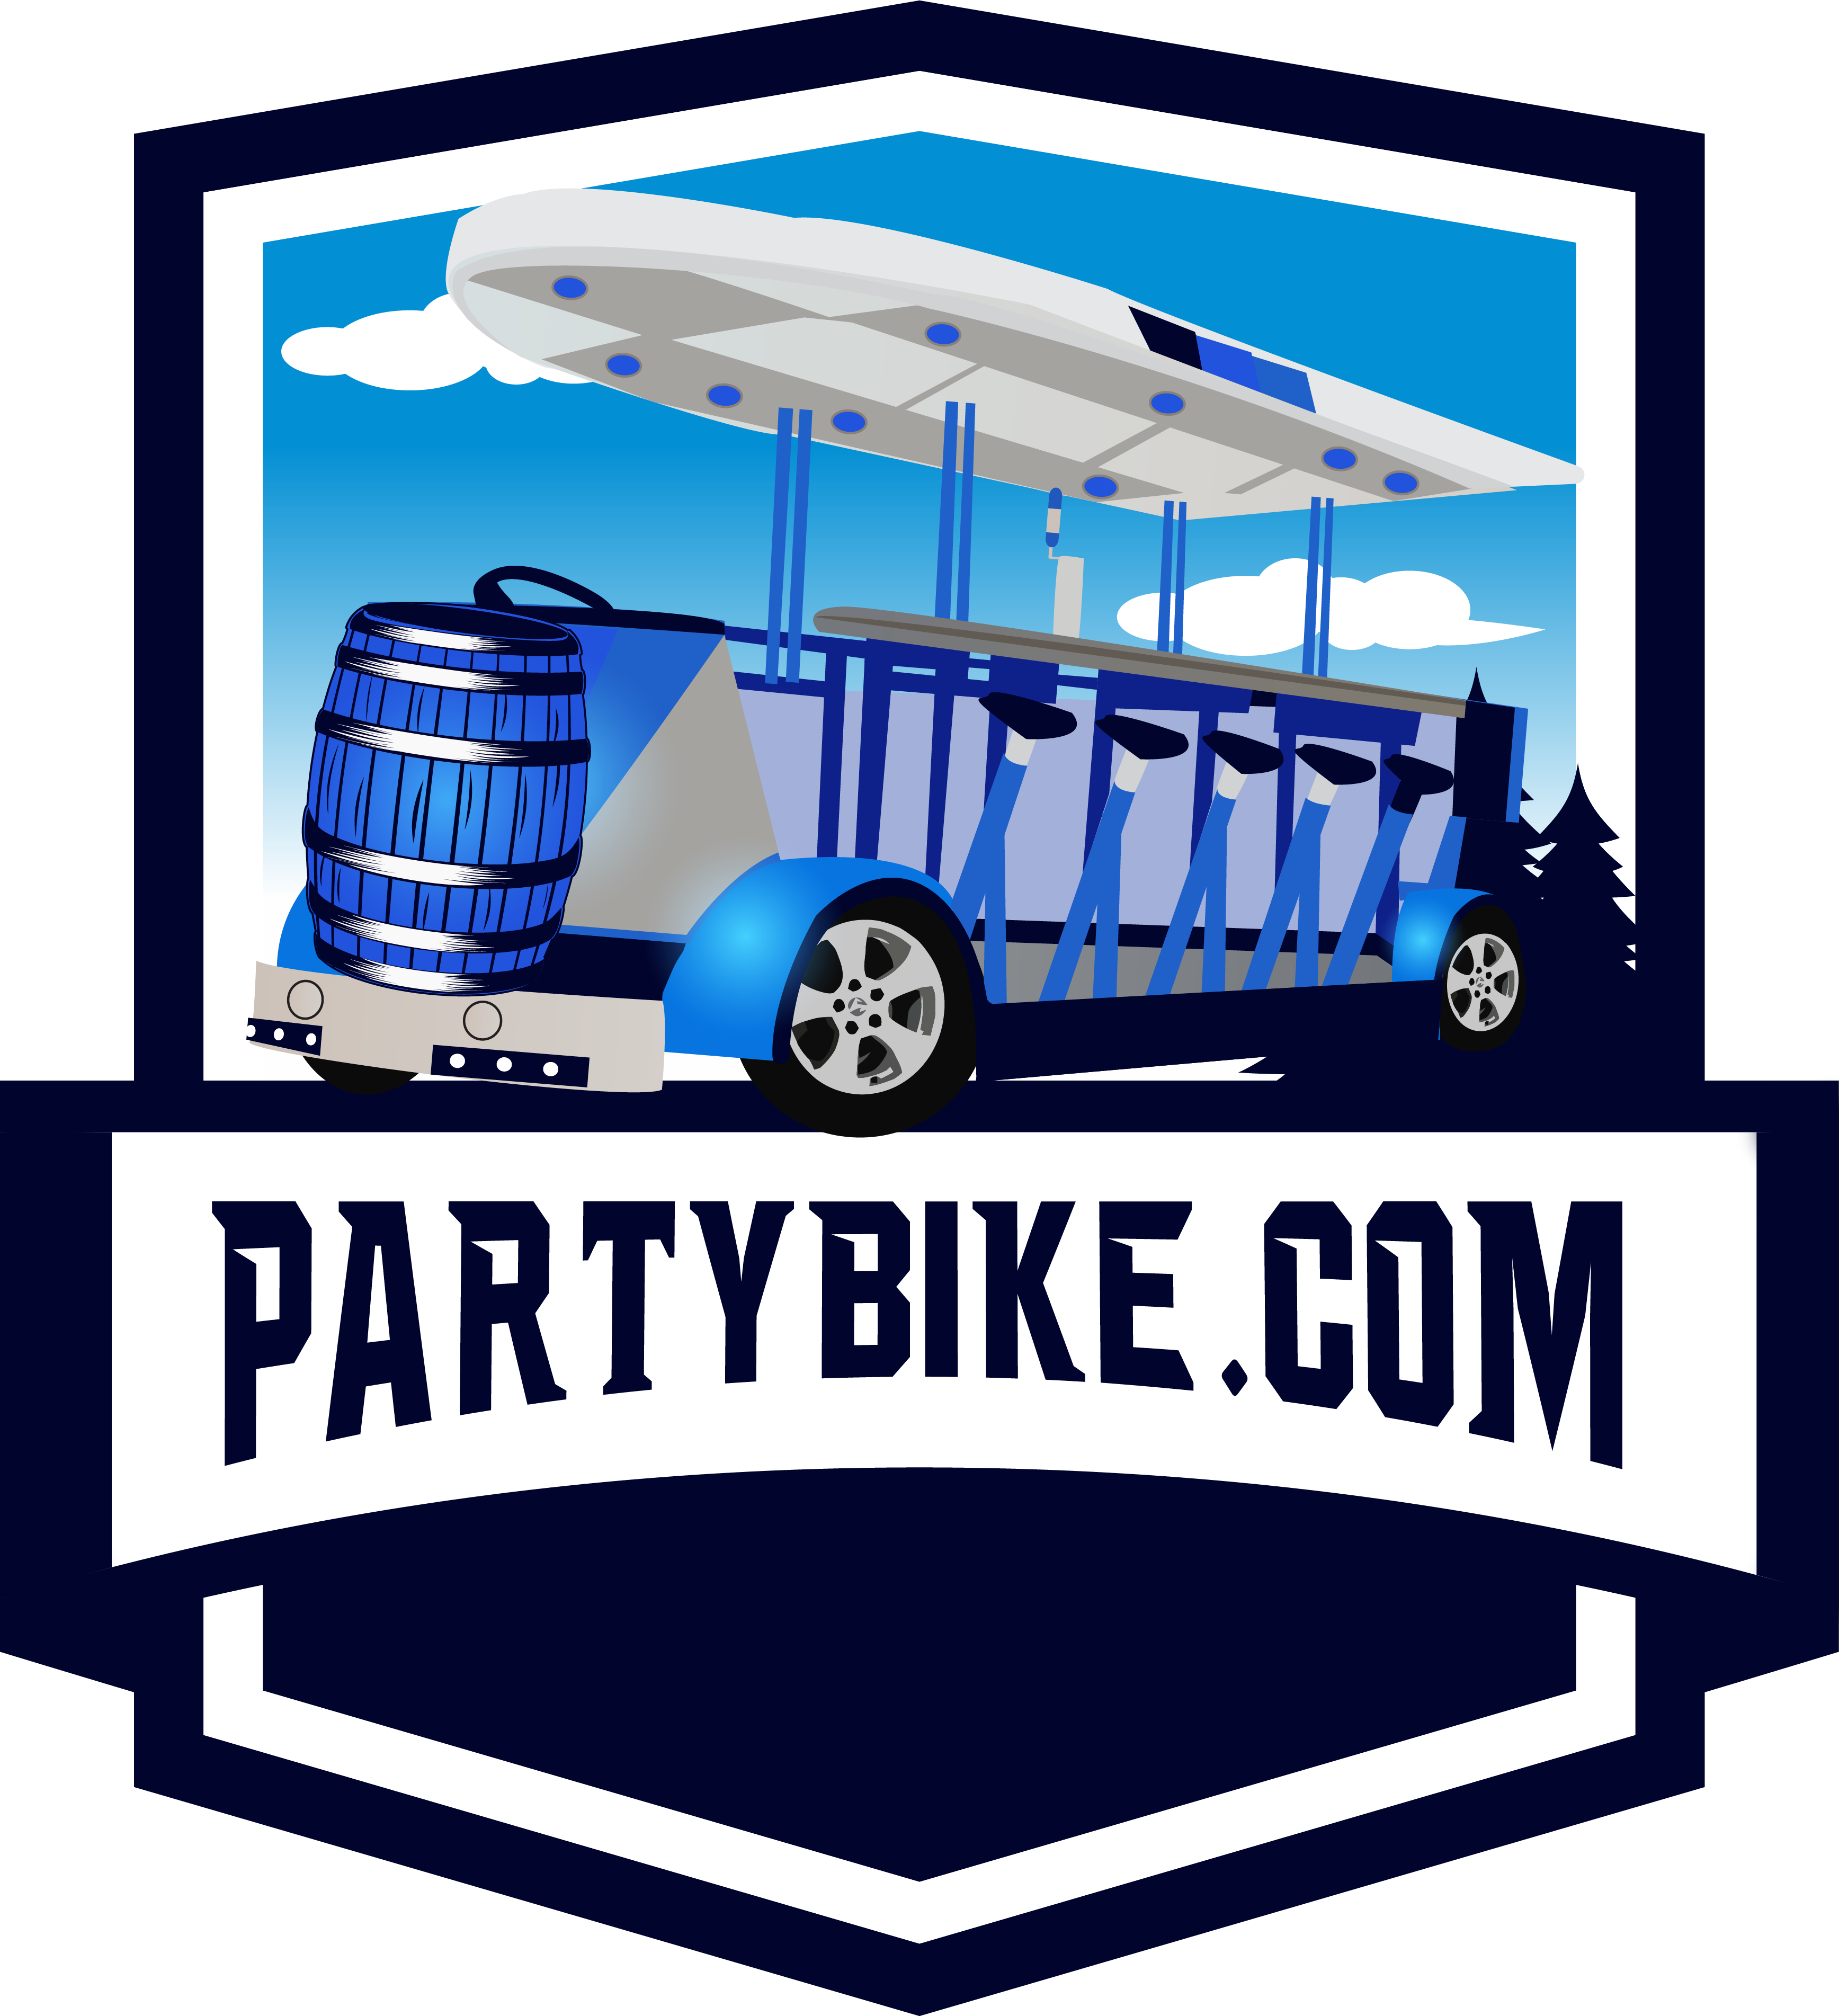 Book Your Party Bike Pub Crawl at PartyBike.com!